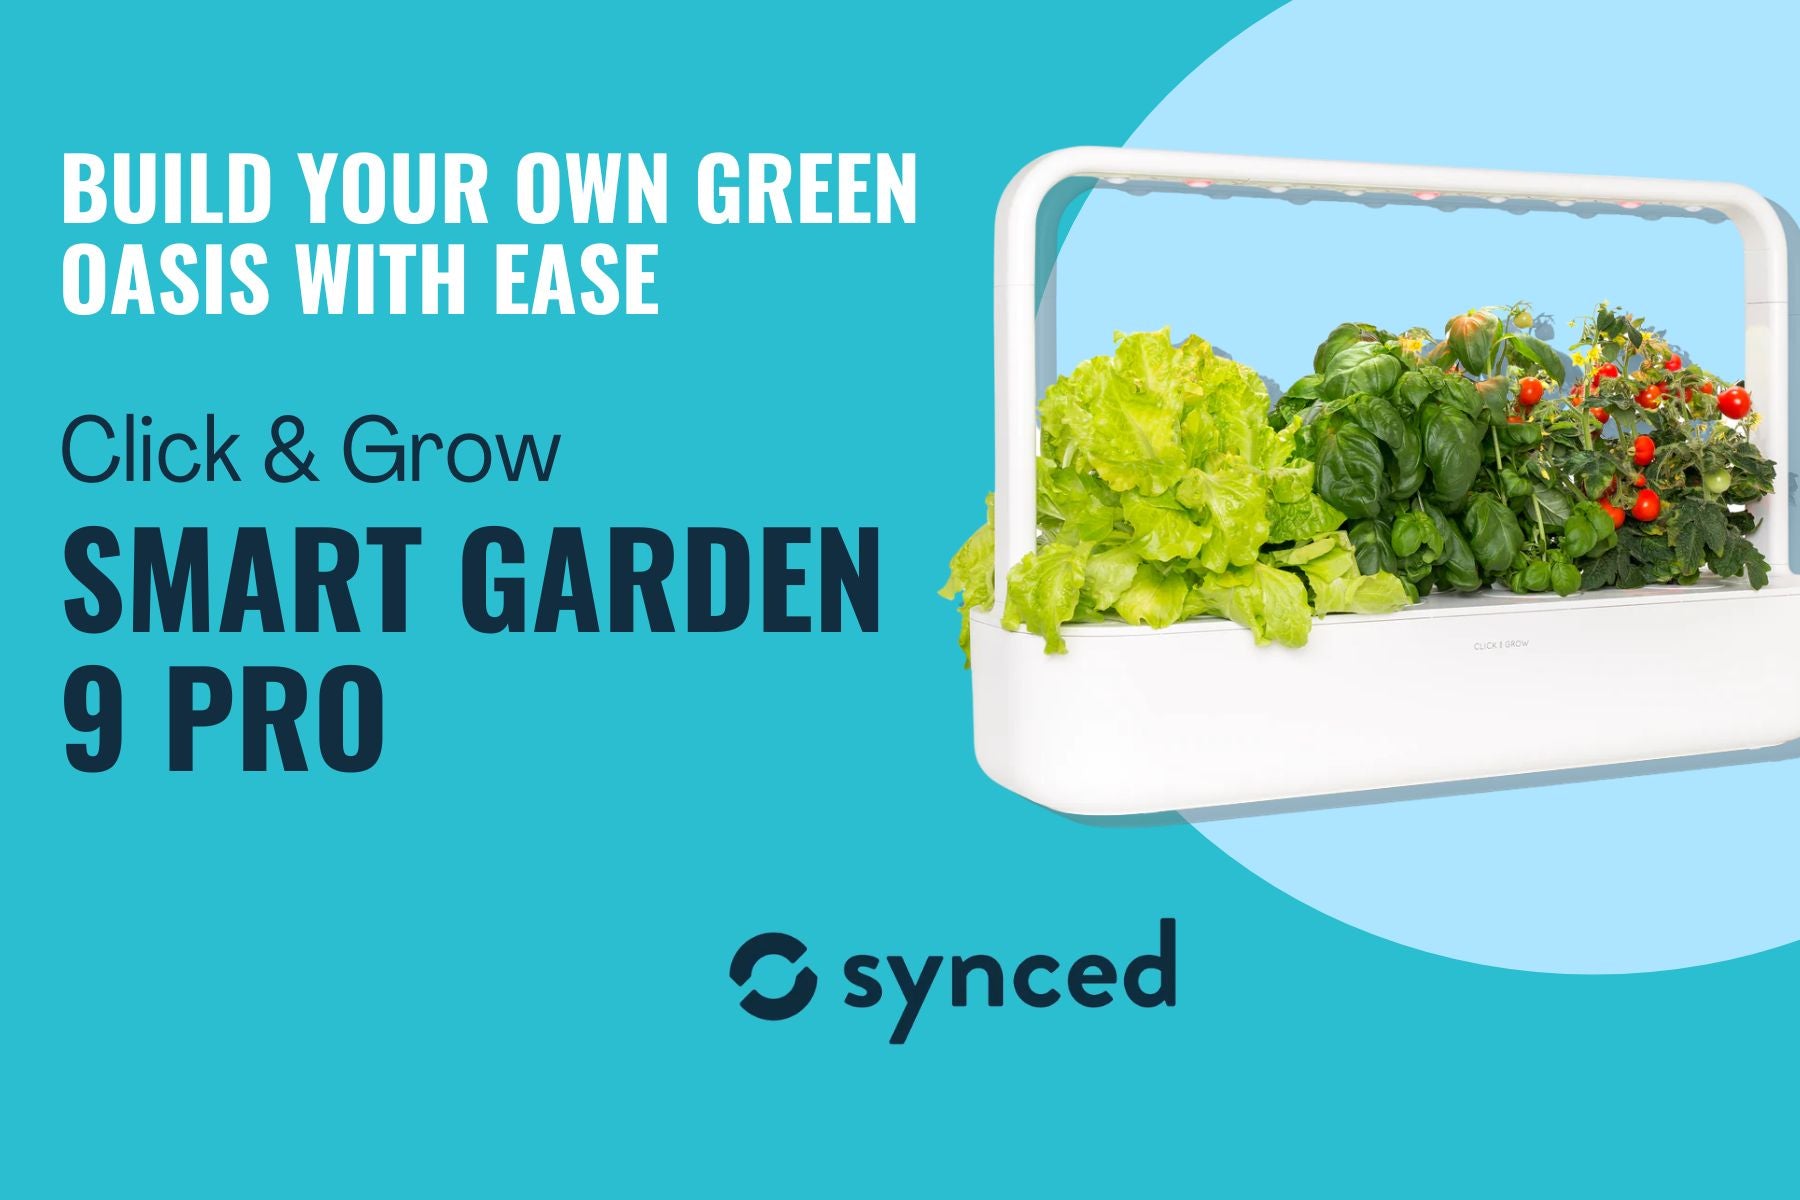 Build Your Own Green Oasis with Ease: Click & Grow Smart Garden 9 PRO